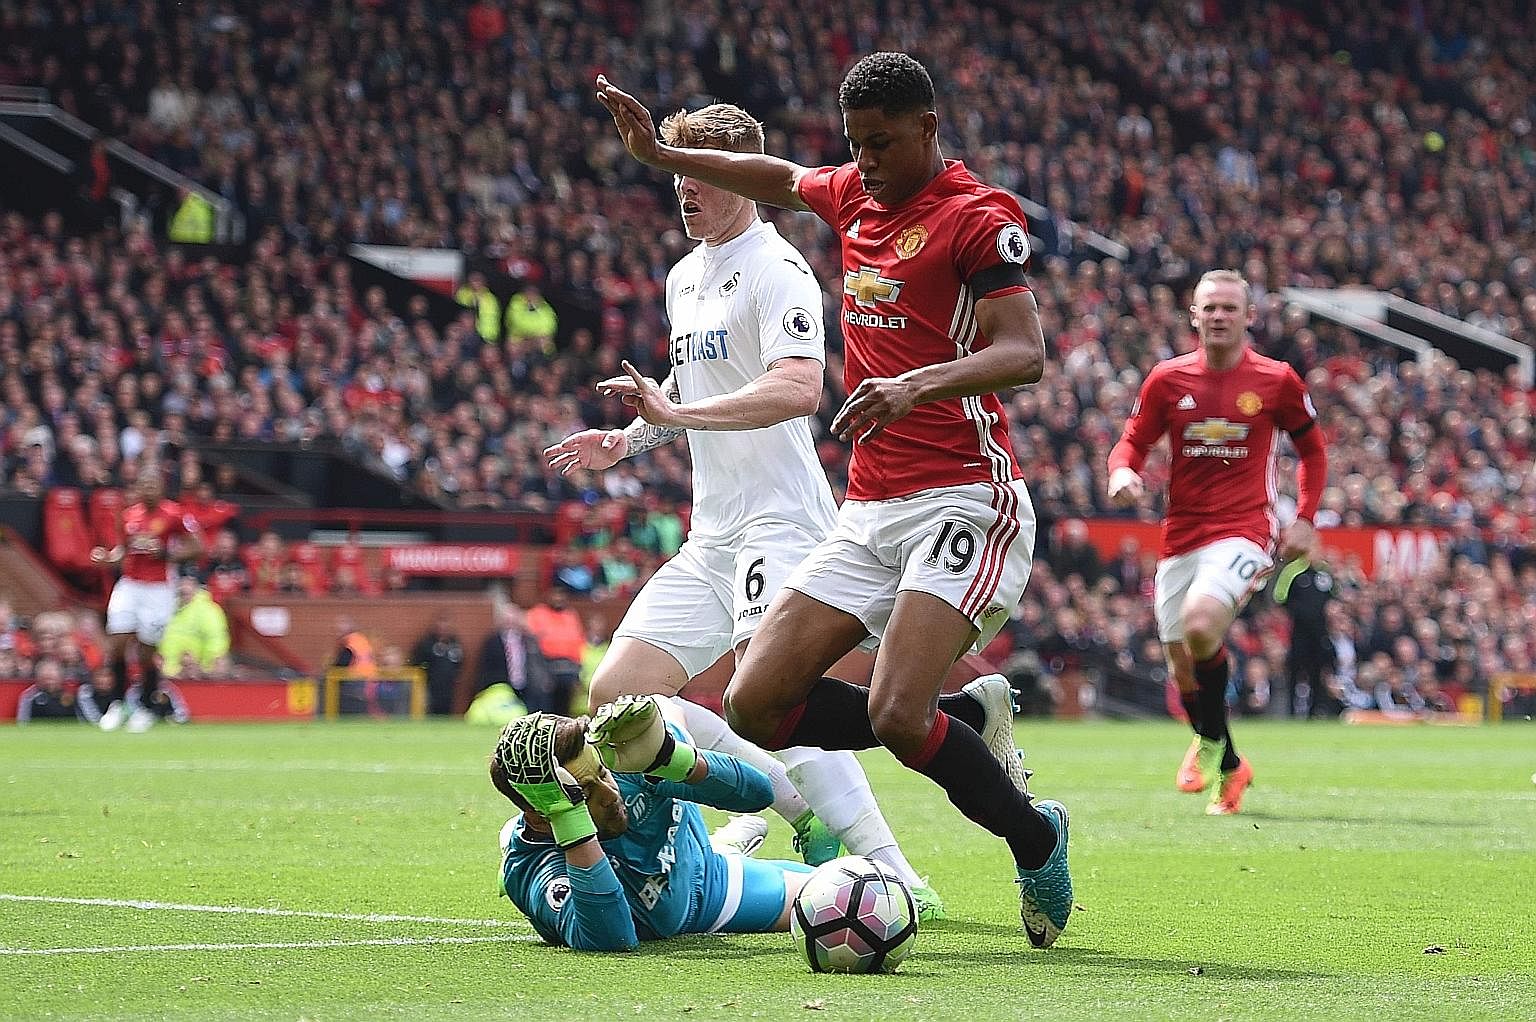 Manchester United's English striker Marcus Rashford goes down as Swansea goalkeeper Lukasz Fabianski pulls his arms away. His dive earned his side a penalty in the English Premier League clash.